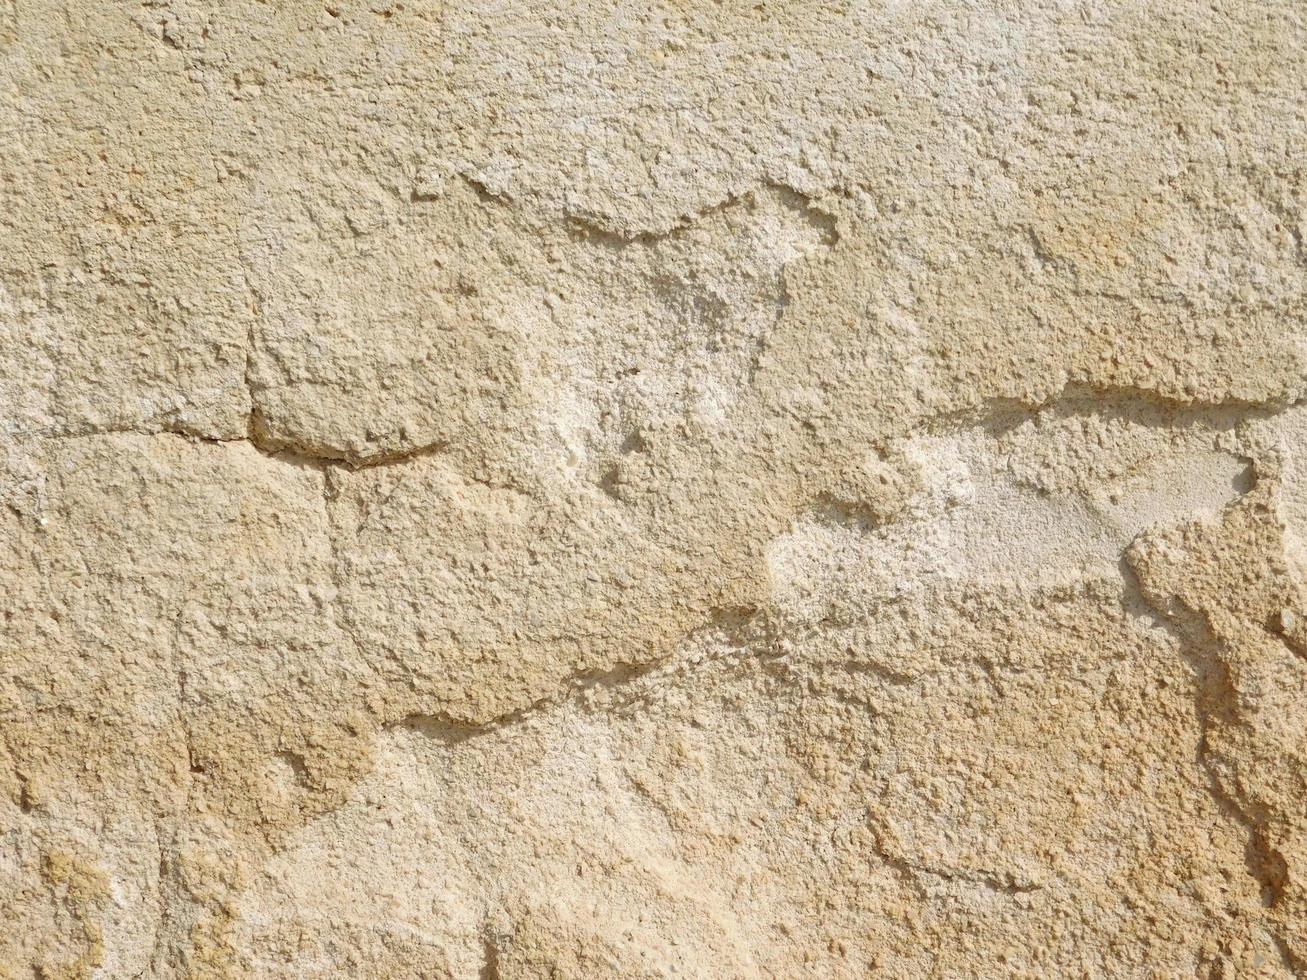 Rock or stone wall for background or texture photo